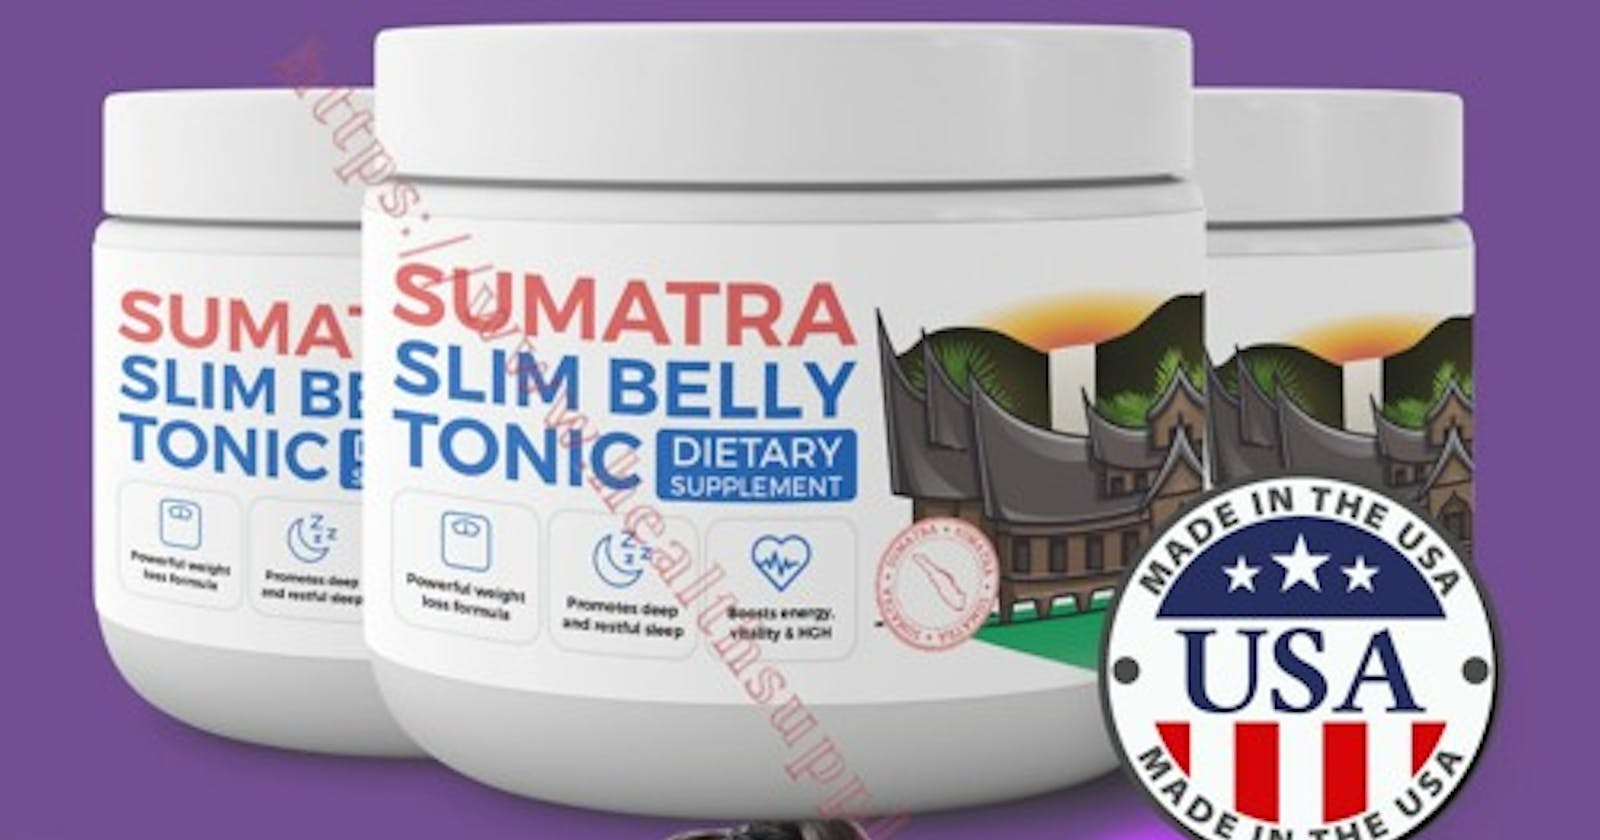 Sumatra Slim Belly Tonic [IS FAKE or REAL?] Read About Keto Flow Gummiess  100% Natural Product?